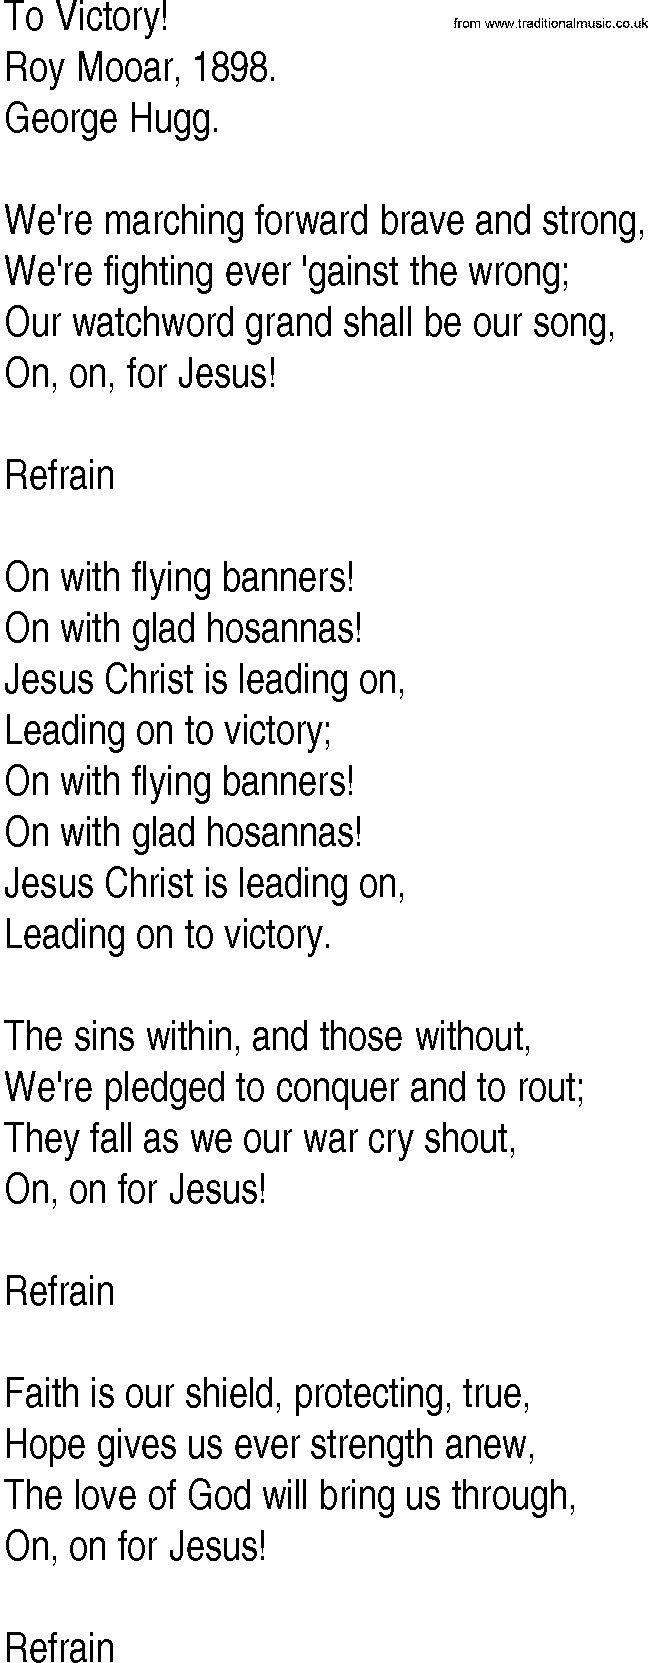 Hymn and Gospel Song: To Victory! by Roy Mooar lyrics